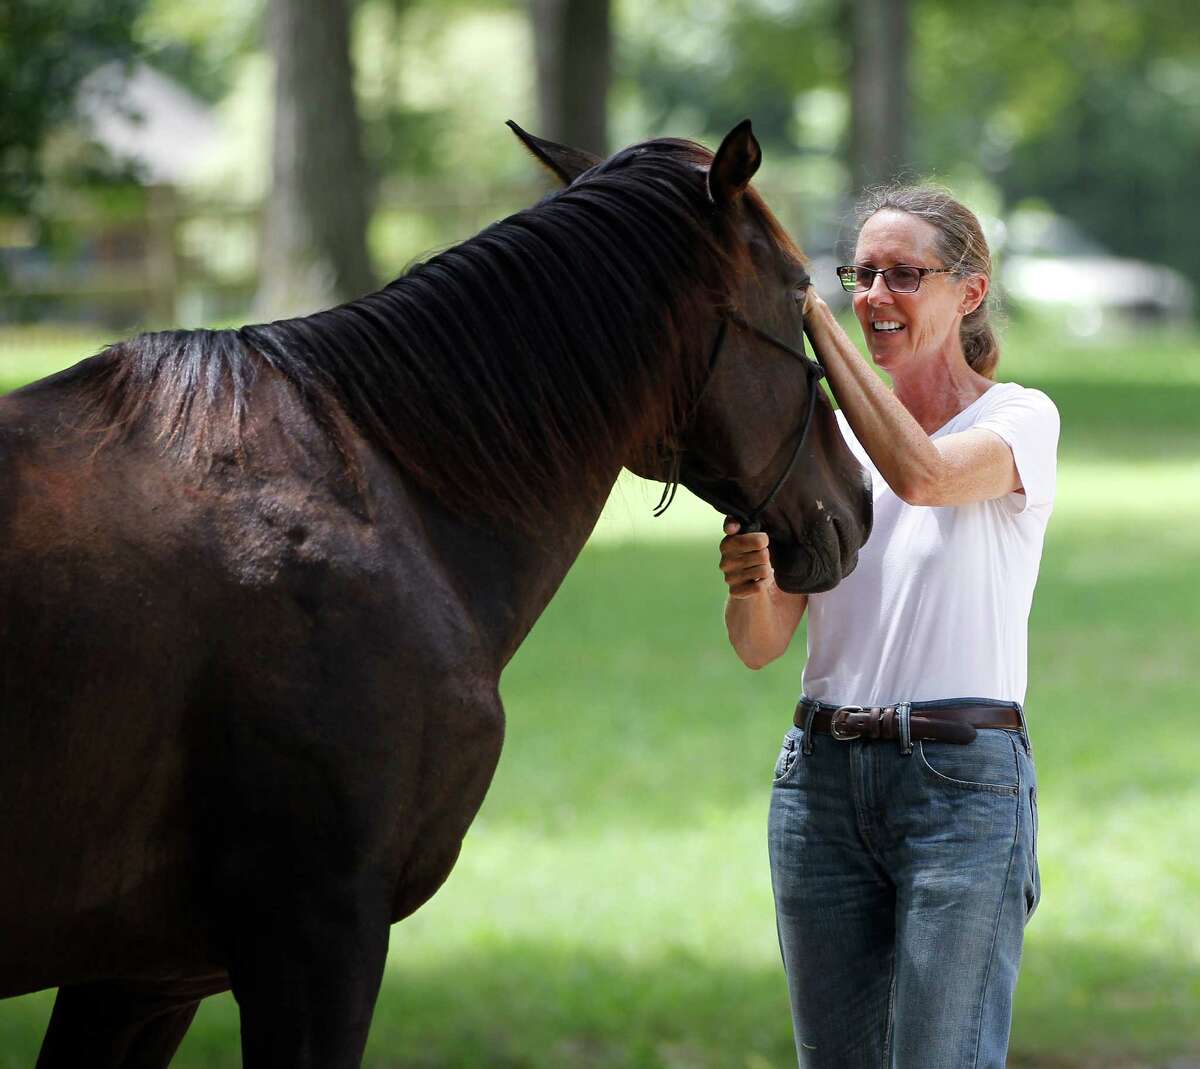 Donna Stedman is the founder and executive director of Henry's Home, which she describes a horse and human sanctuary in Spring. Some neighbors contend the nonprofit business is violating deed restrictions.